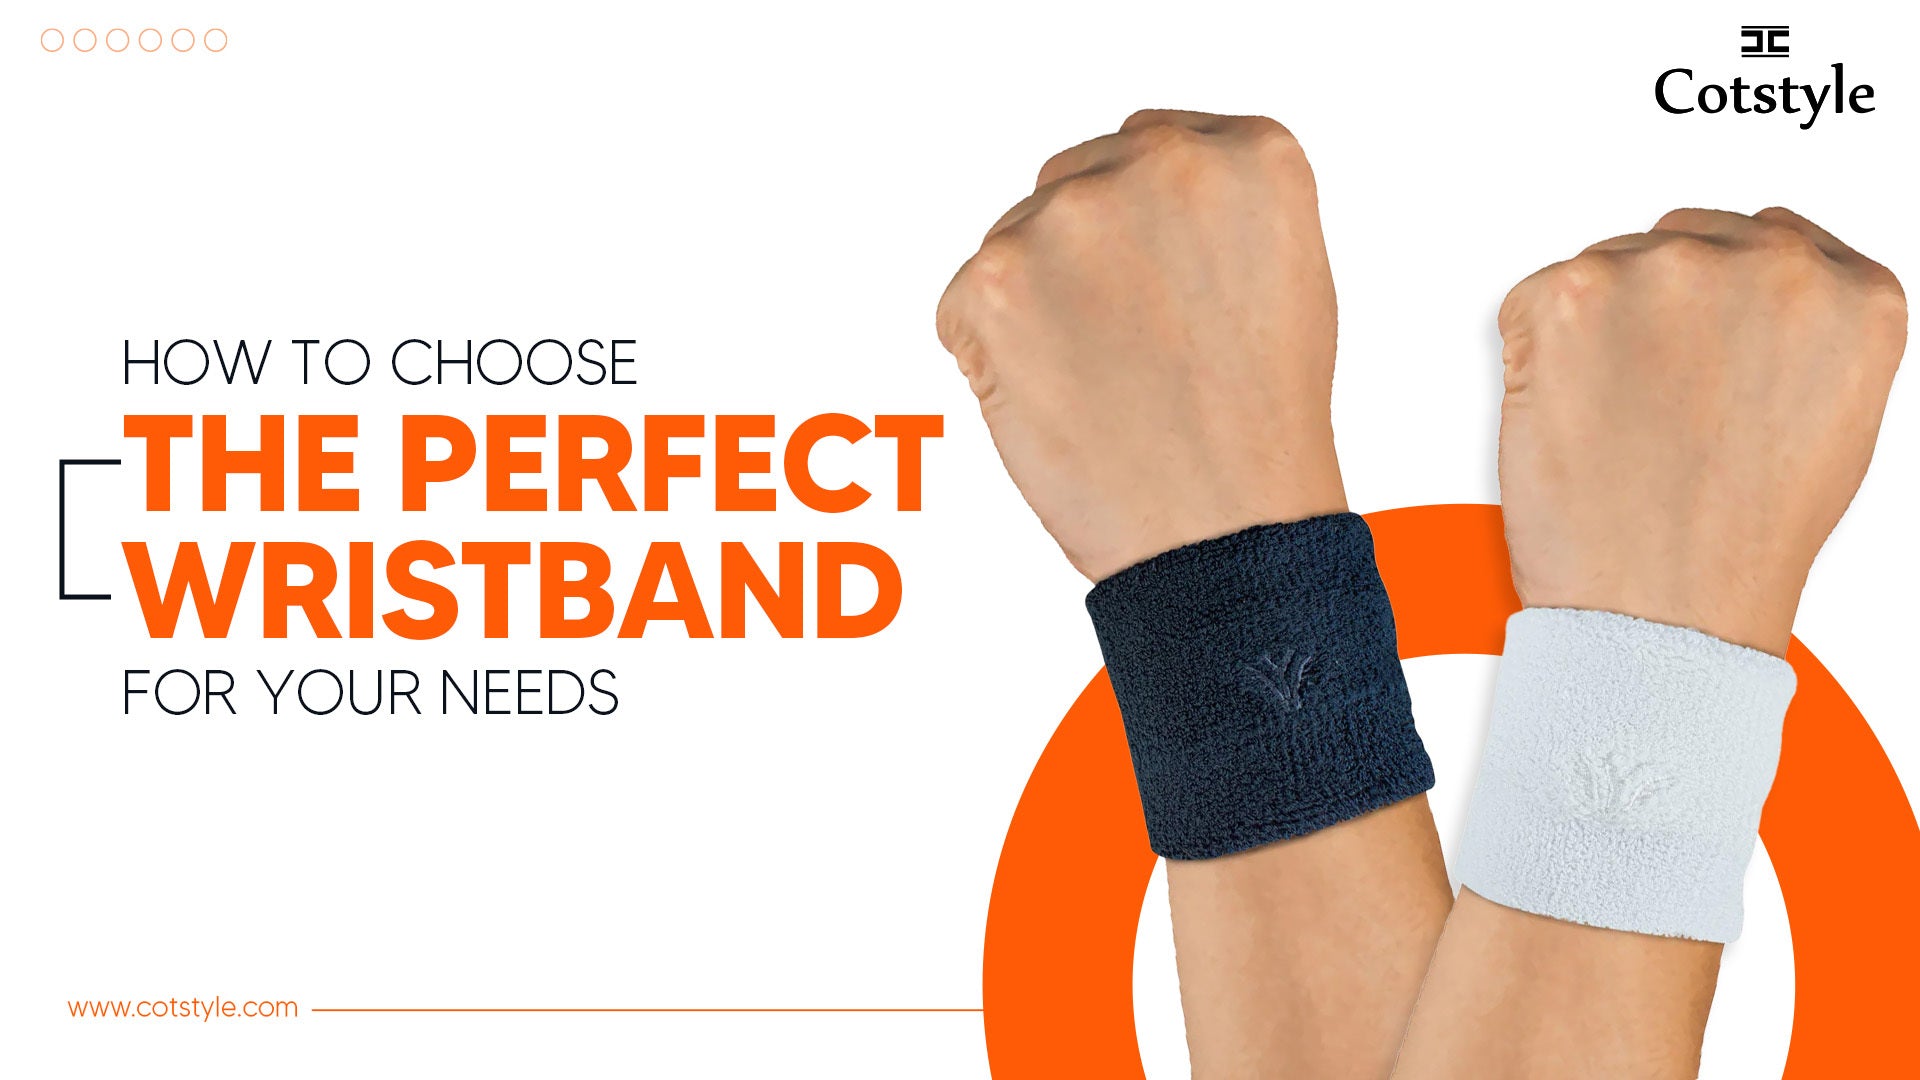 How to Choose the Perfect Wristband for Your Needs